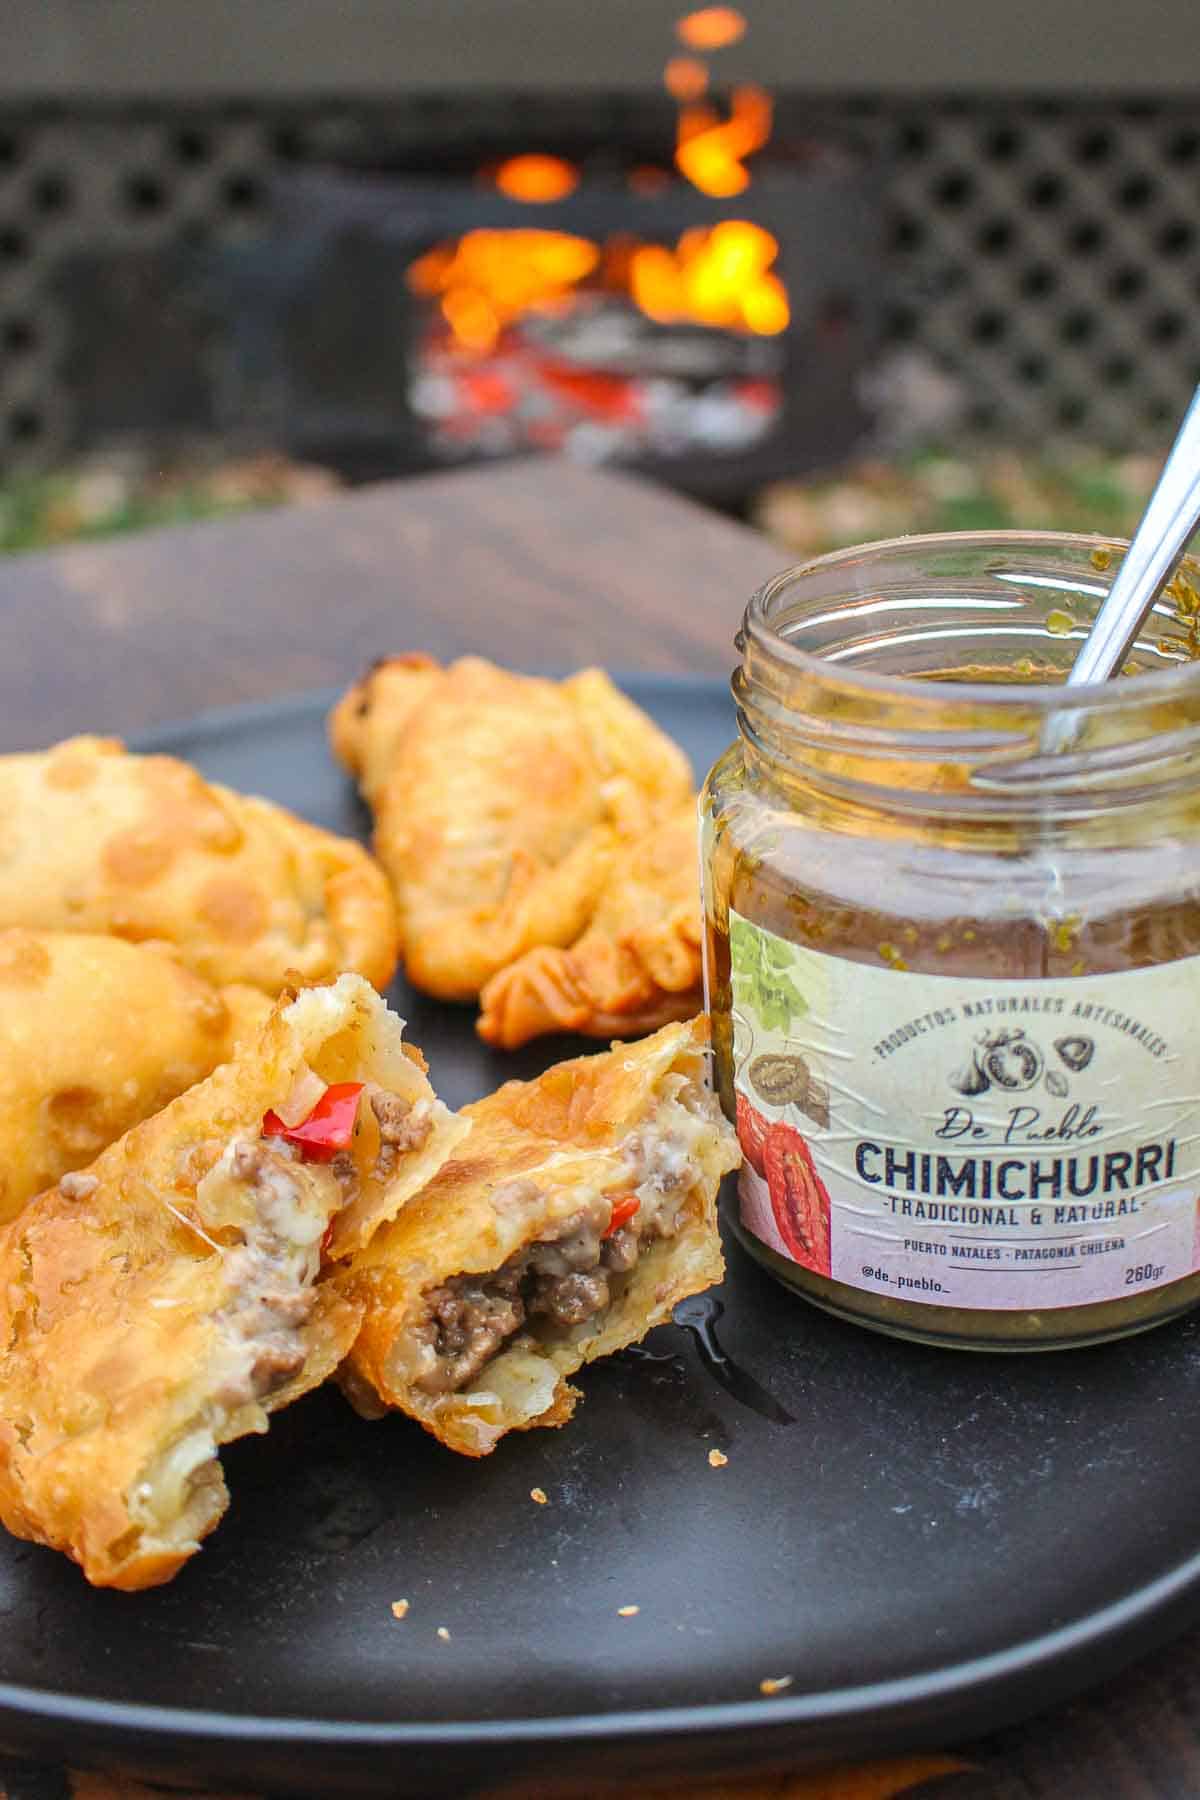 The empanadas are served with traditional chimichurri sauce. 